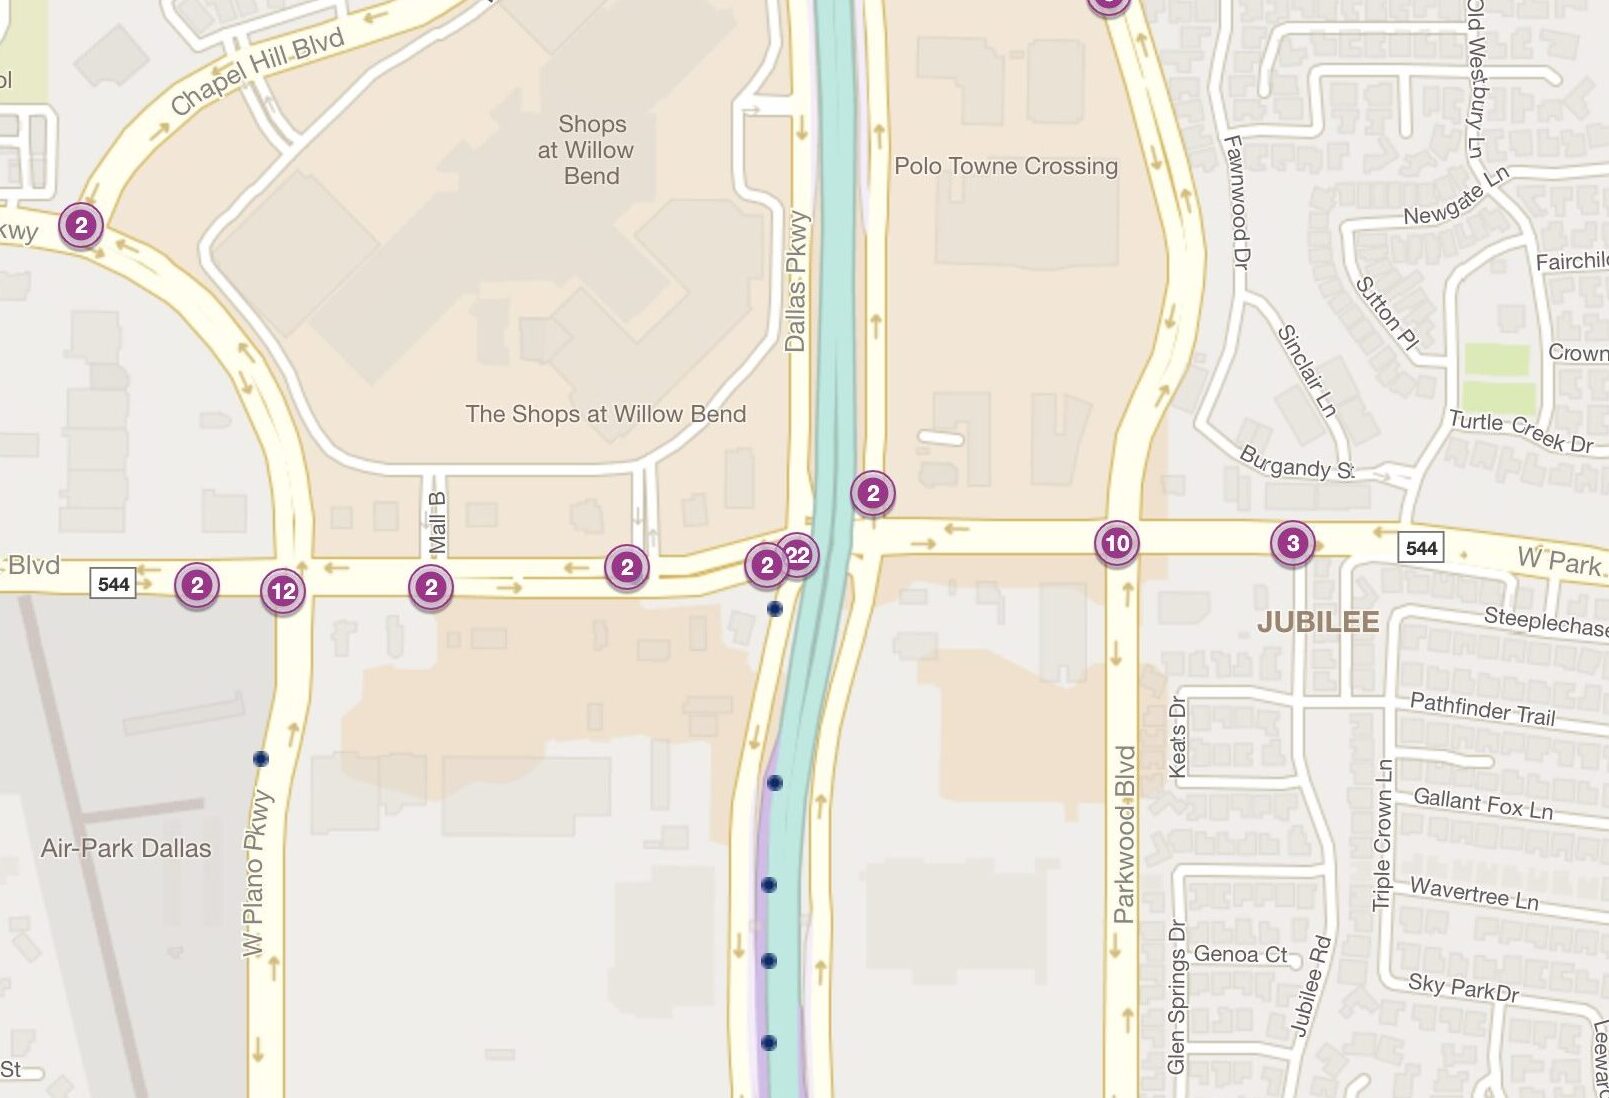 Cluster Map of 2023 Car Accidents at Dallas North Tollway & W. Park Blvd. (TXDOT)